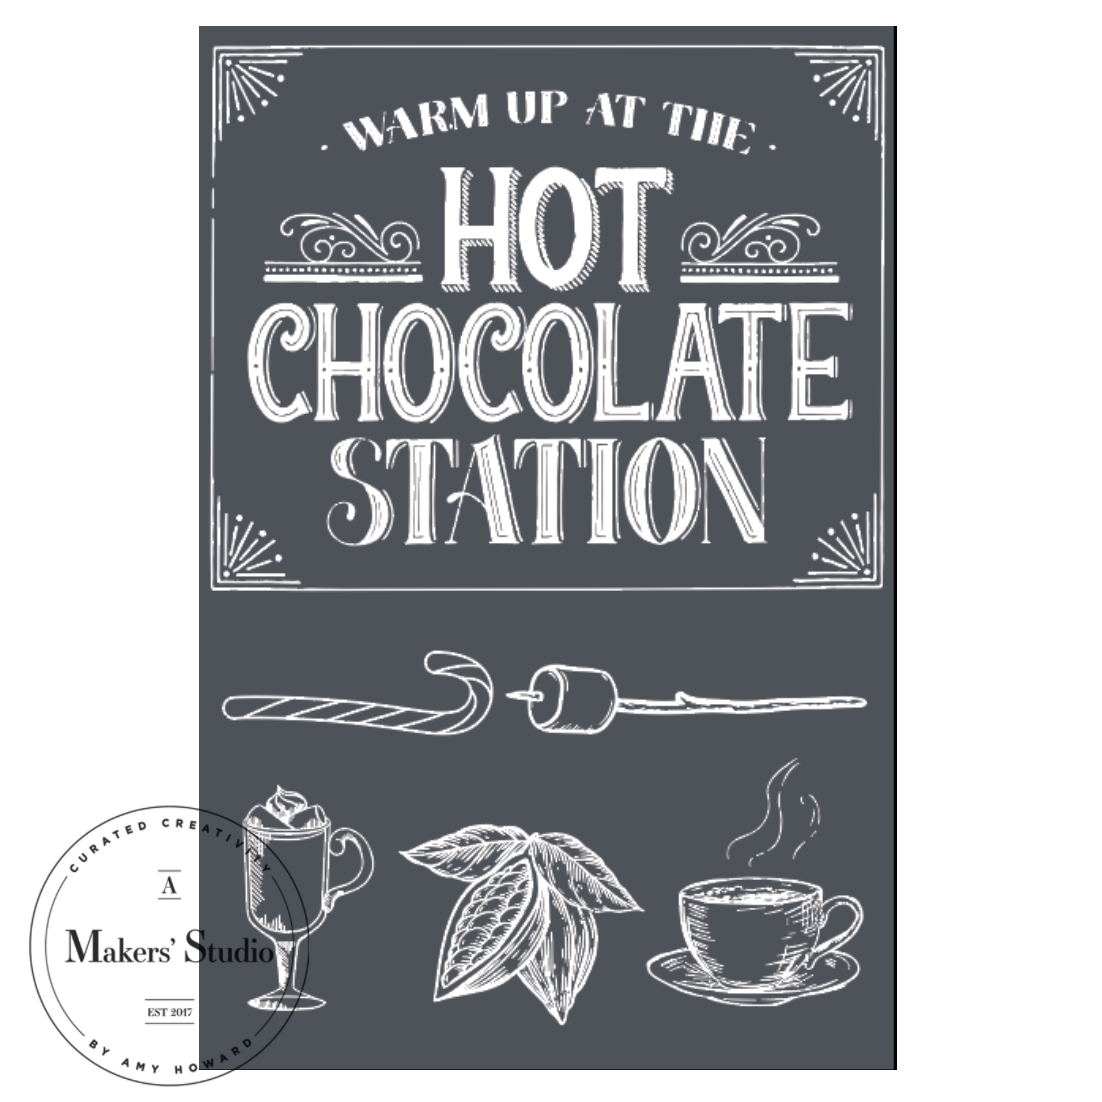 Hot chocolate station - acoking